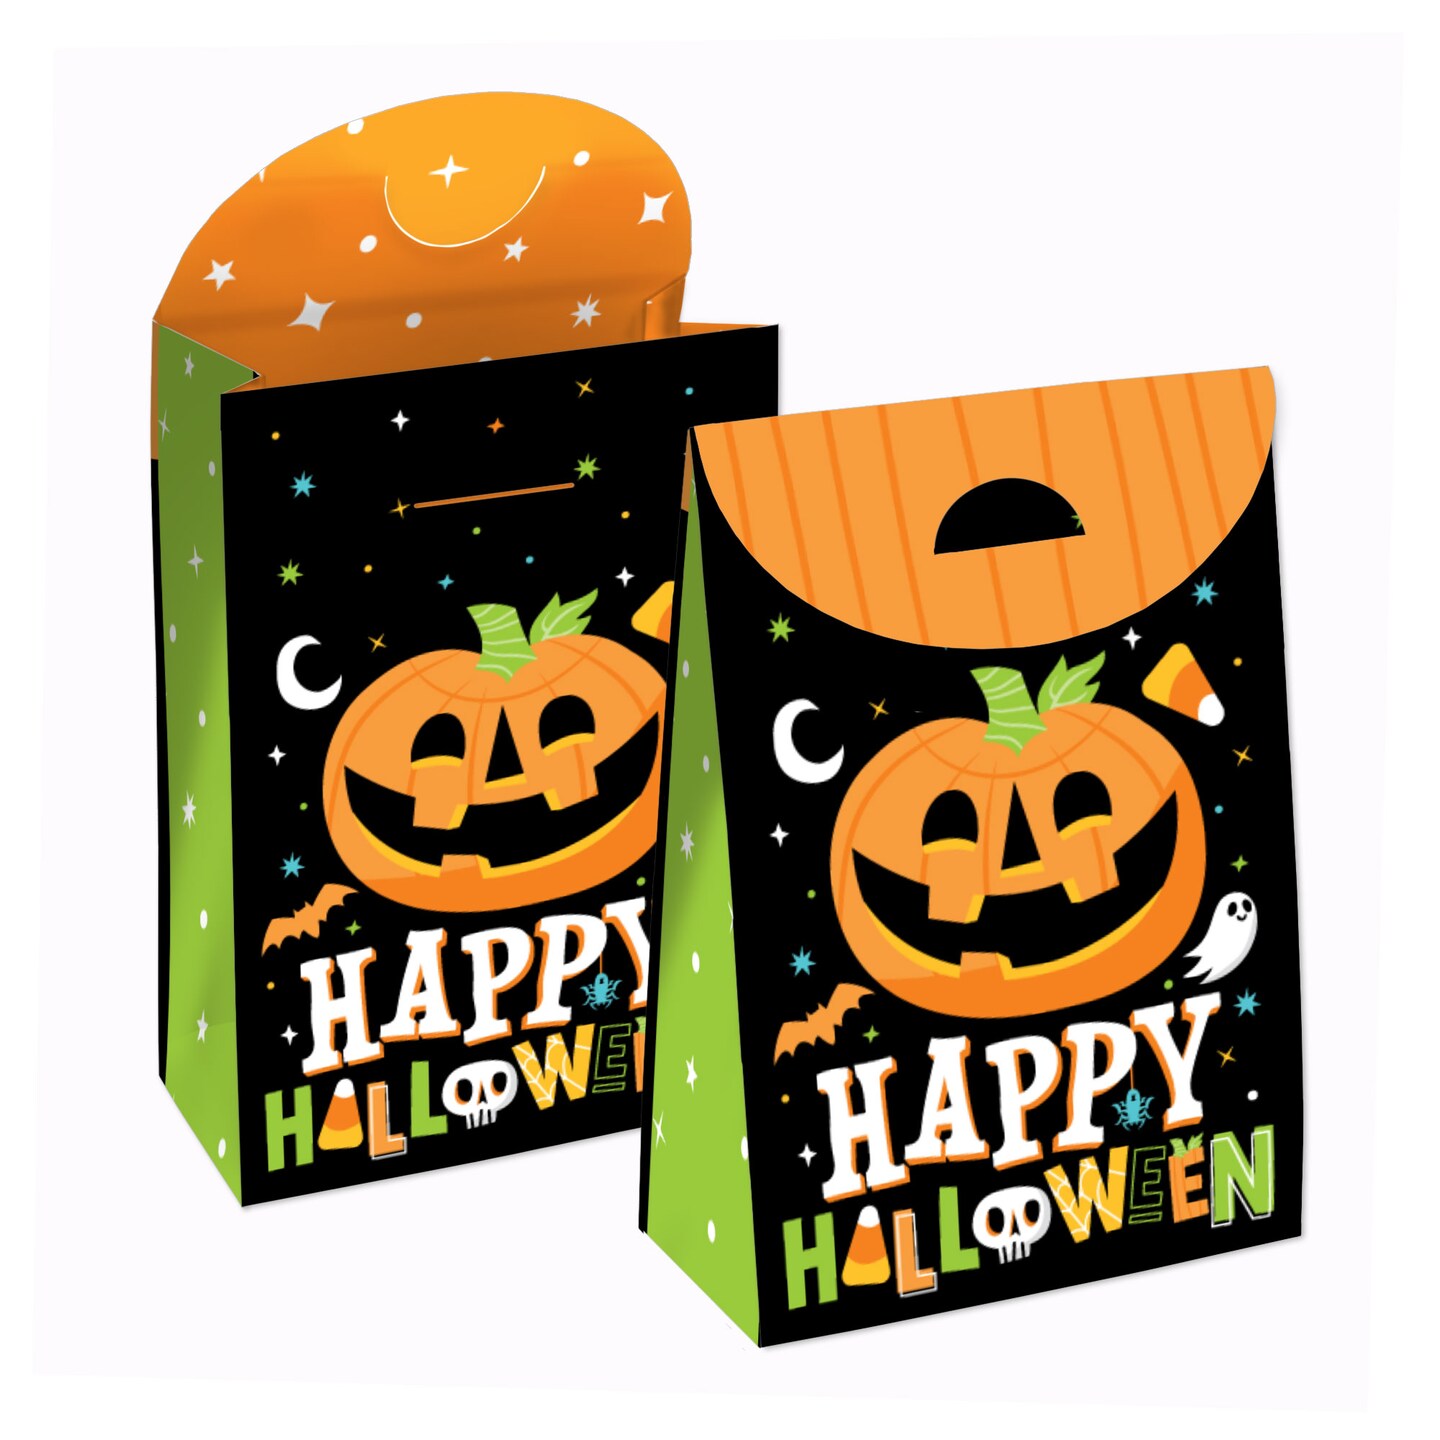 Halloween Goodie Bags  Free Printable  About a Mom